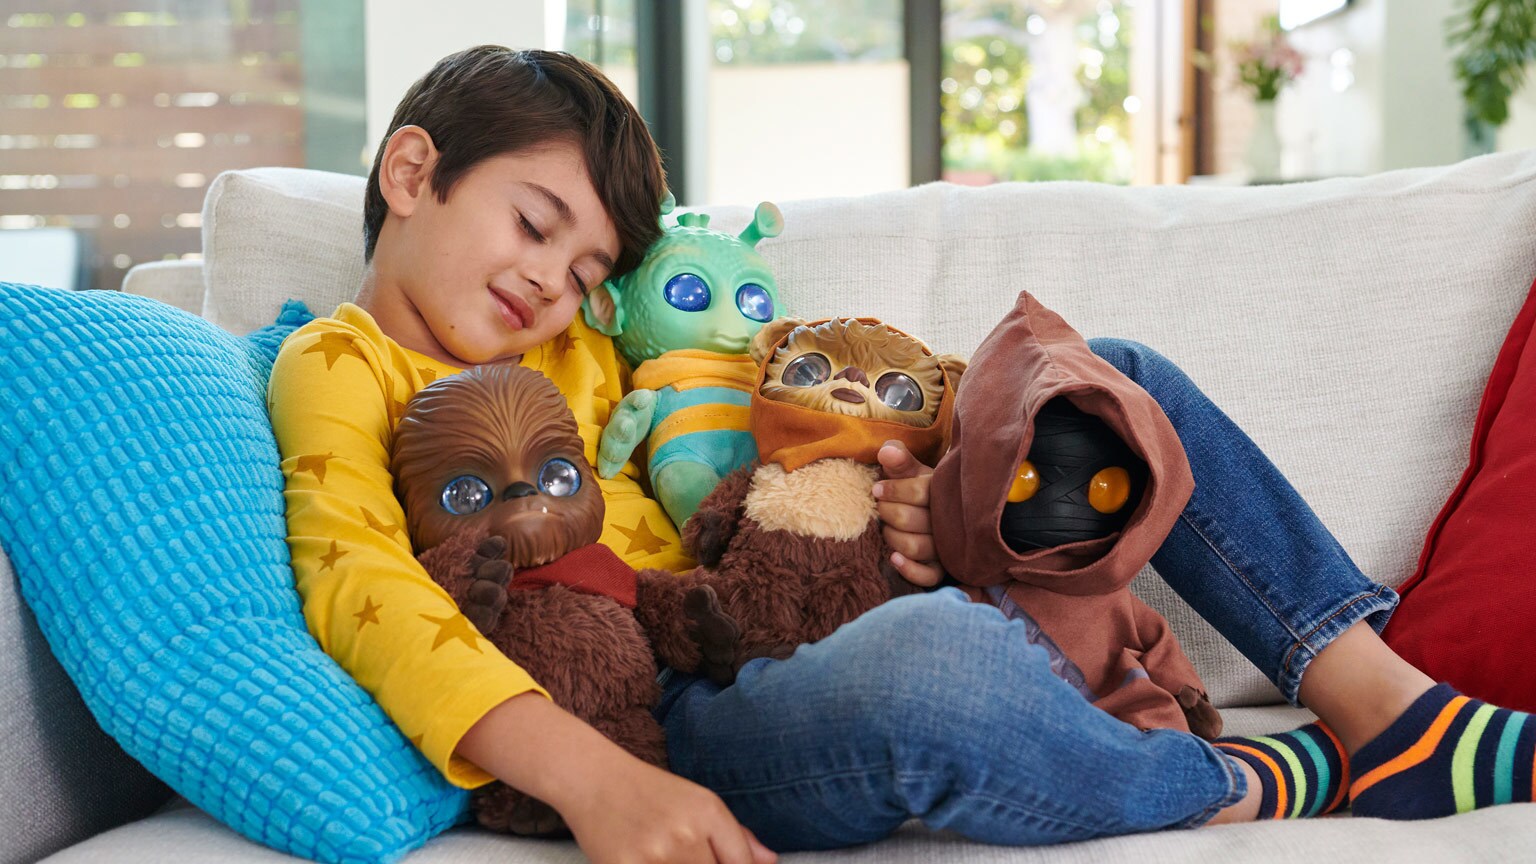 The Star Wars Galaxy Gets Adorable